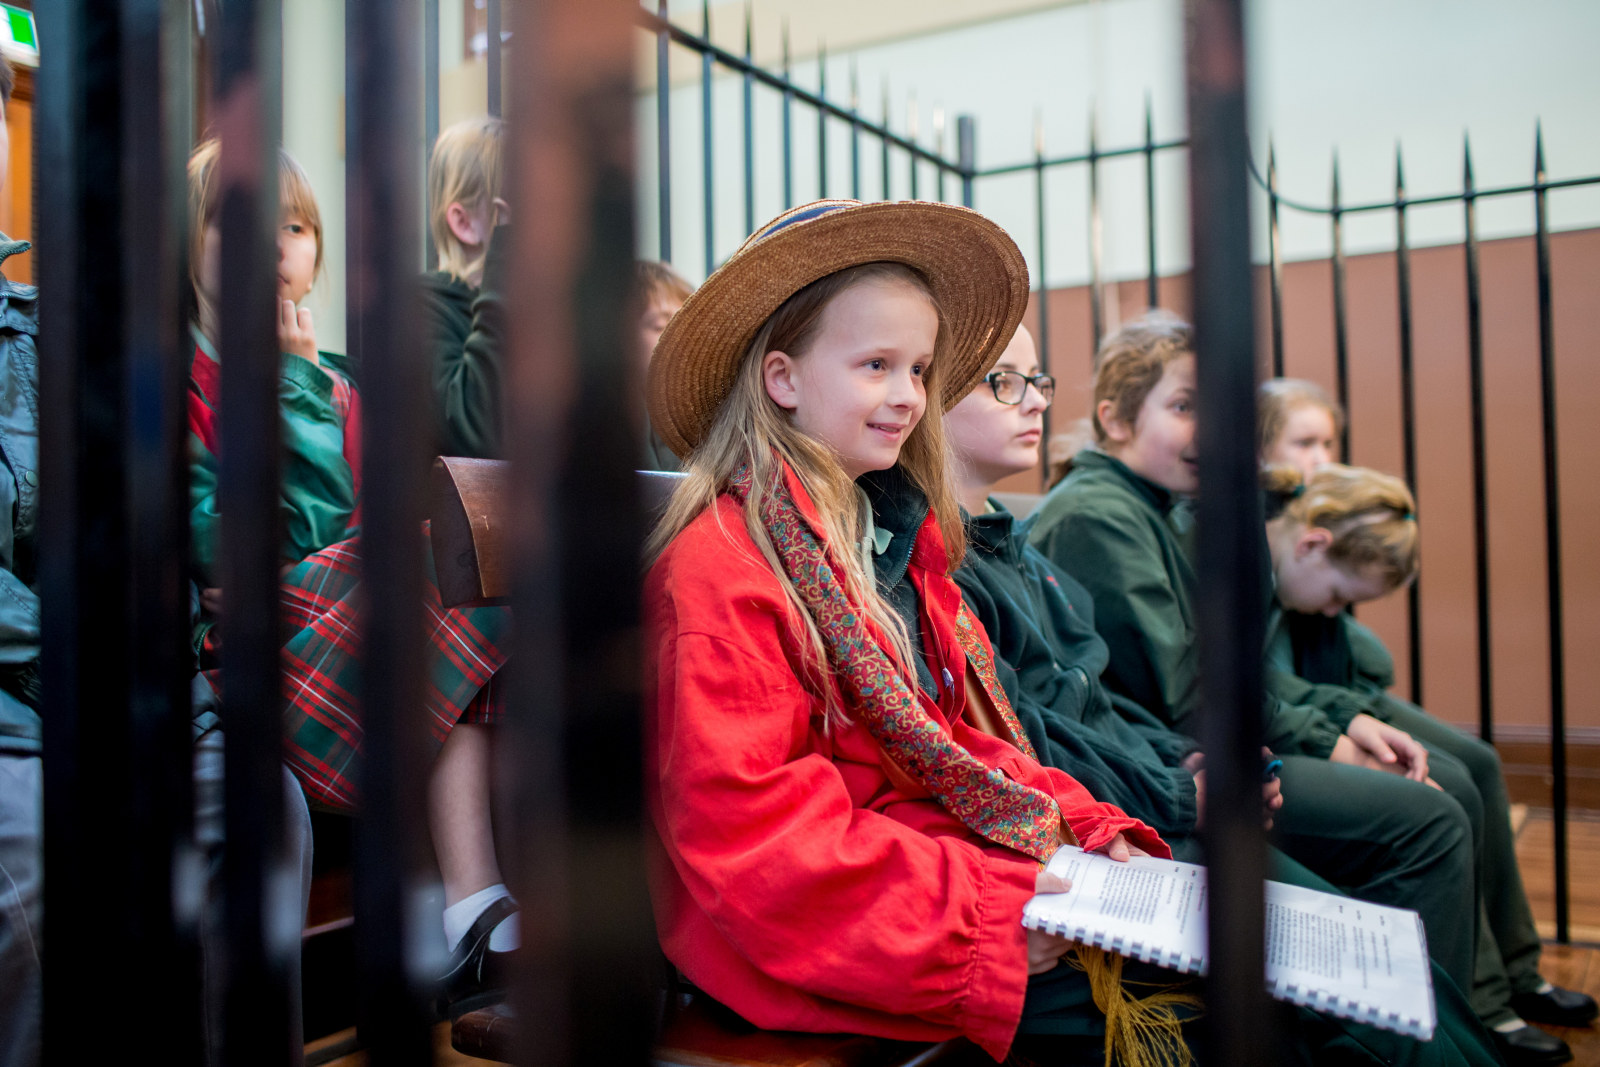 Students in the Jury Box during a re-enactment of bushranger John Vane's trial as part of the Bailed Up! program at the Justice and Police Museum